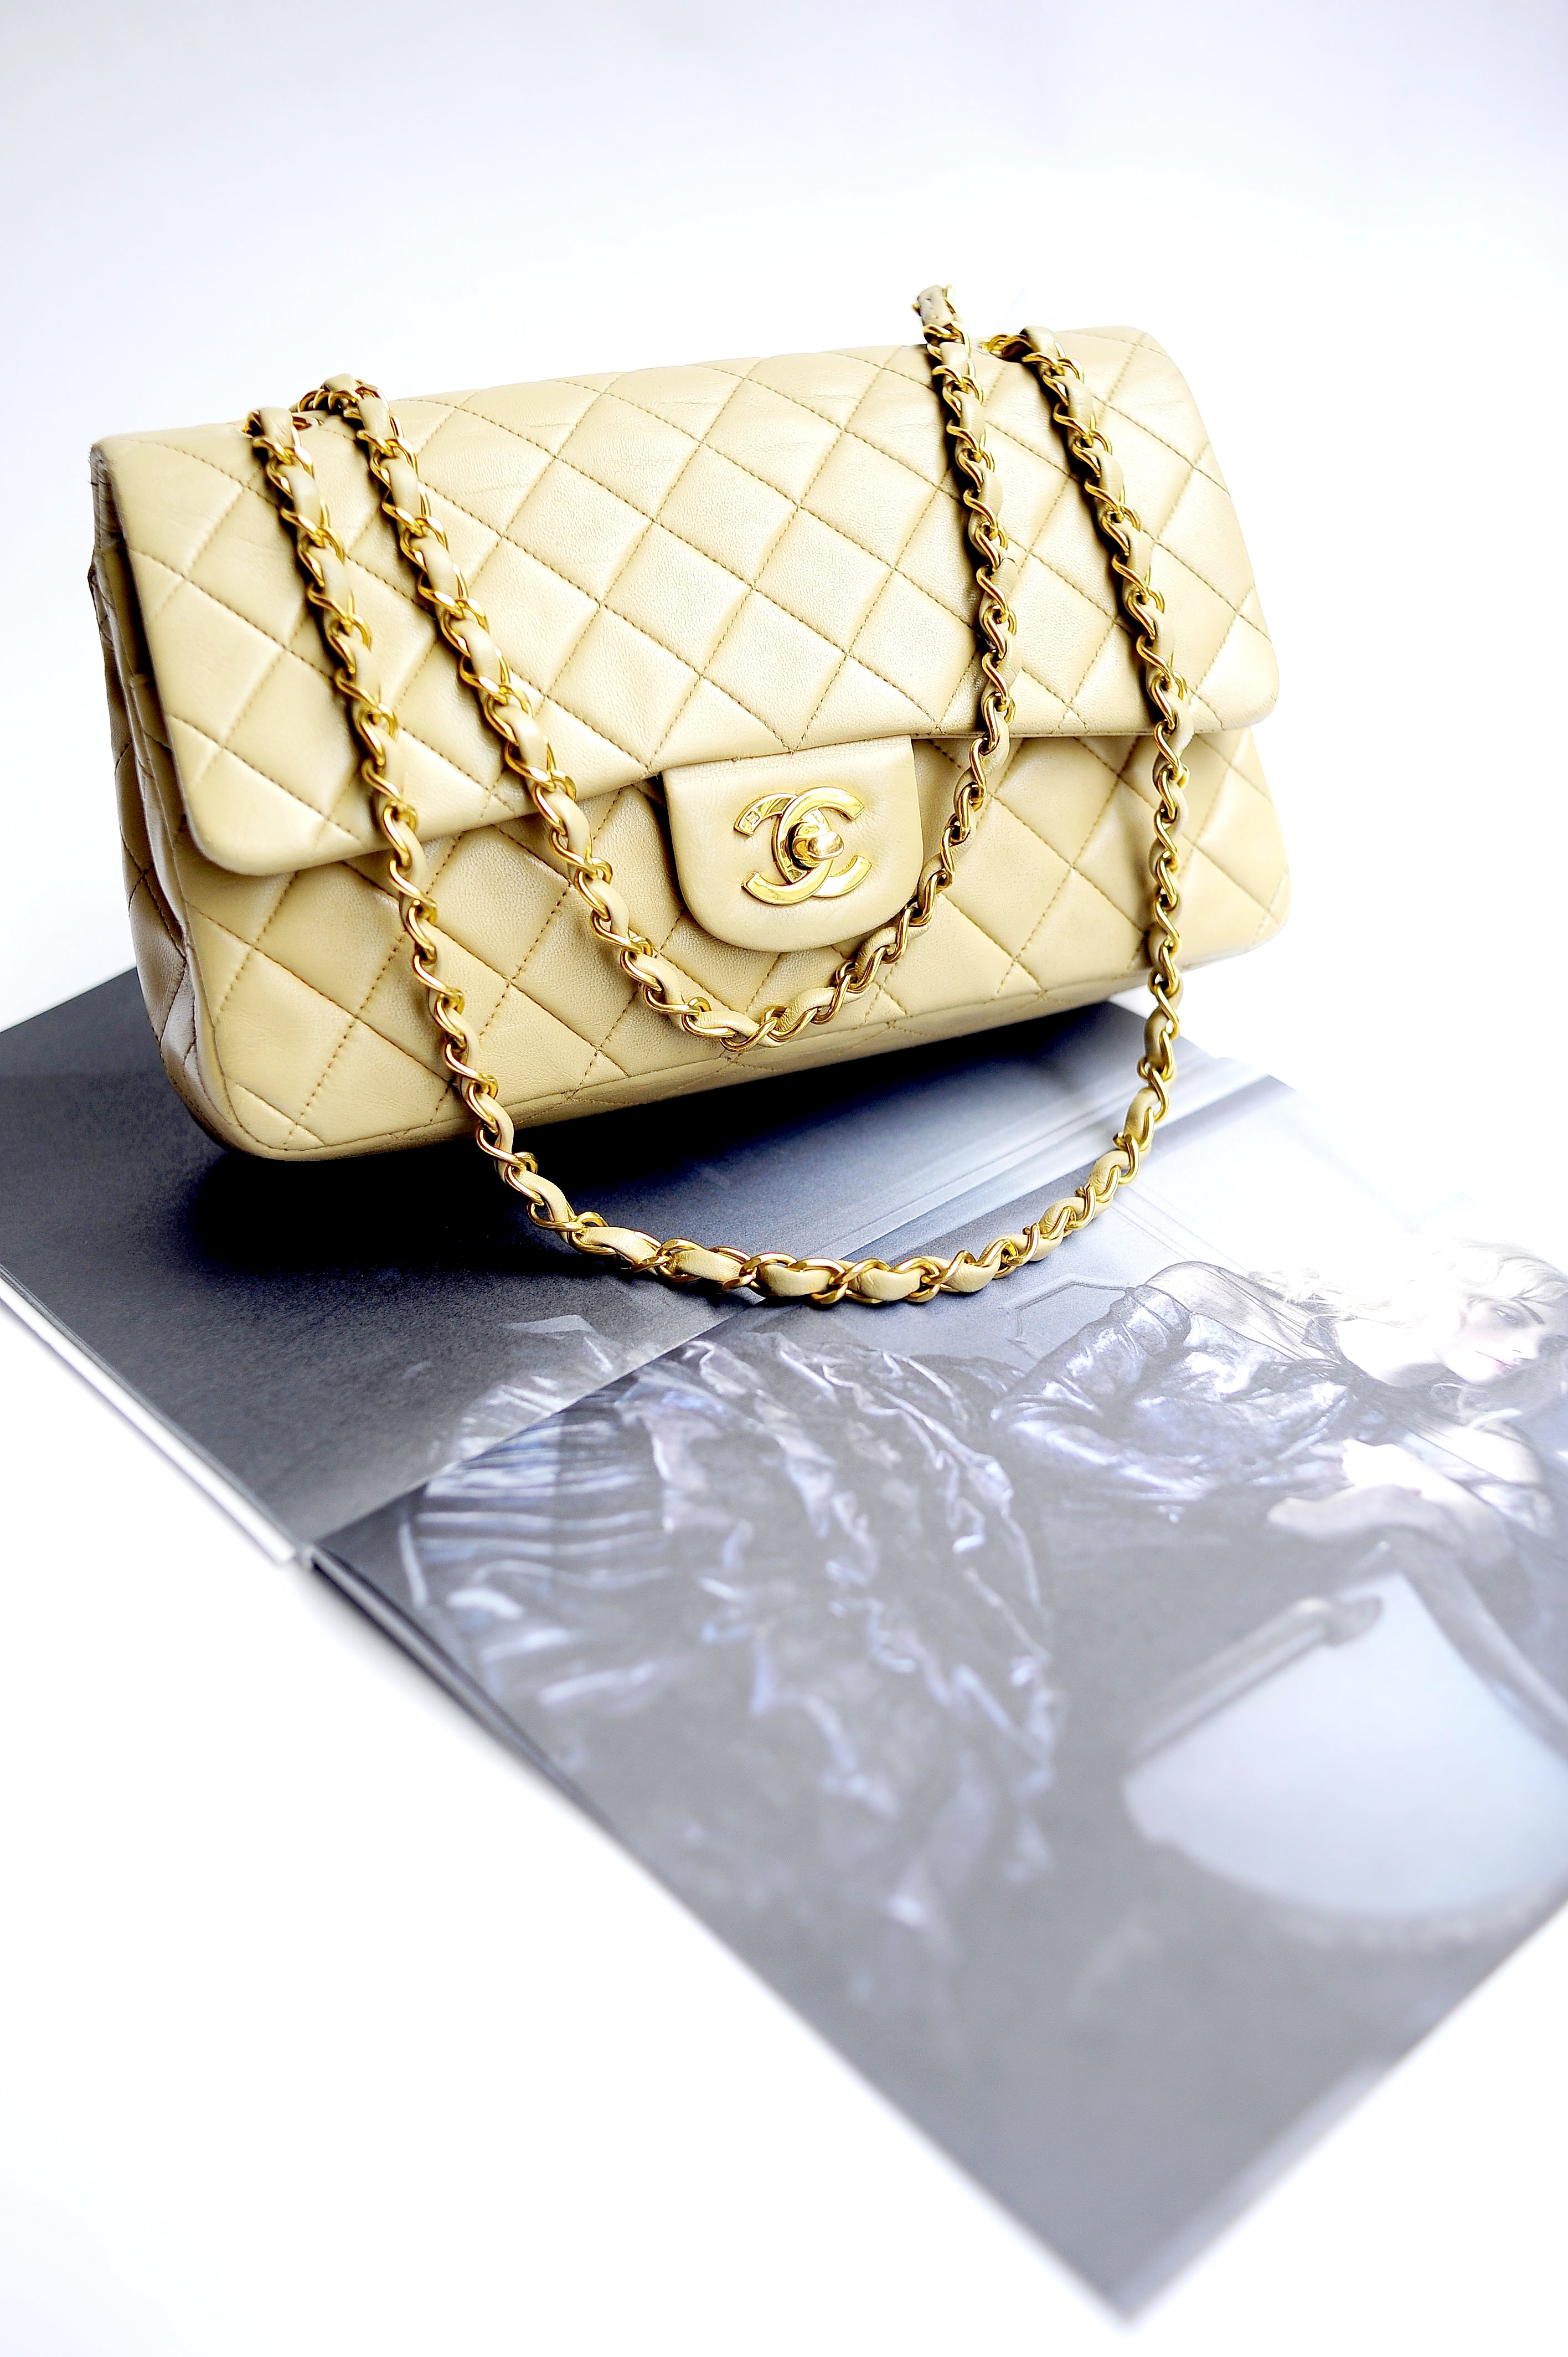 names of chanel bags new